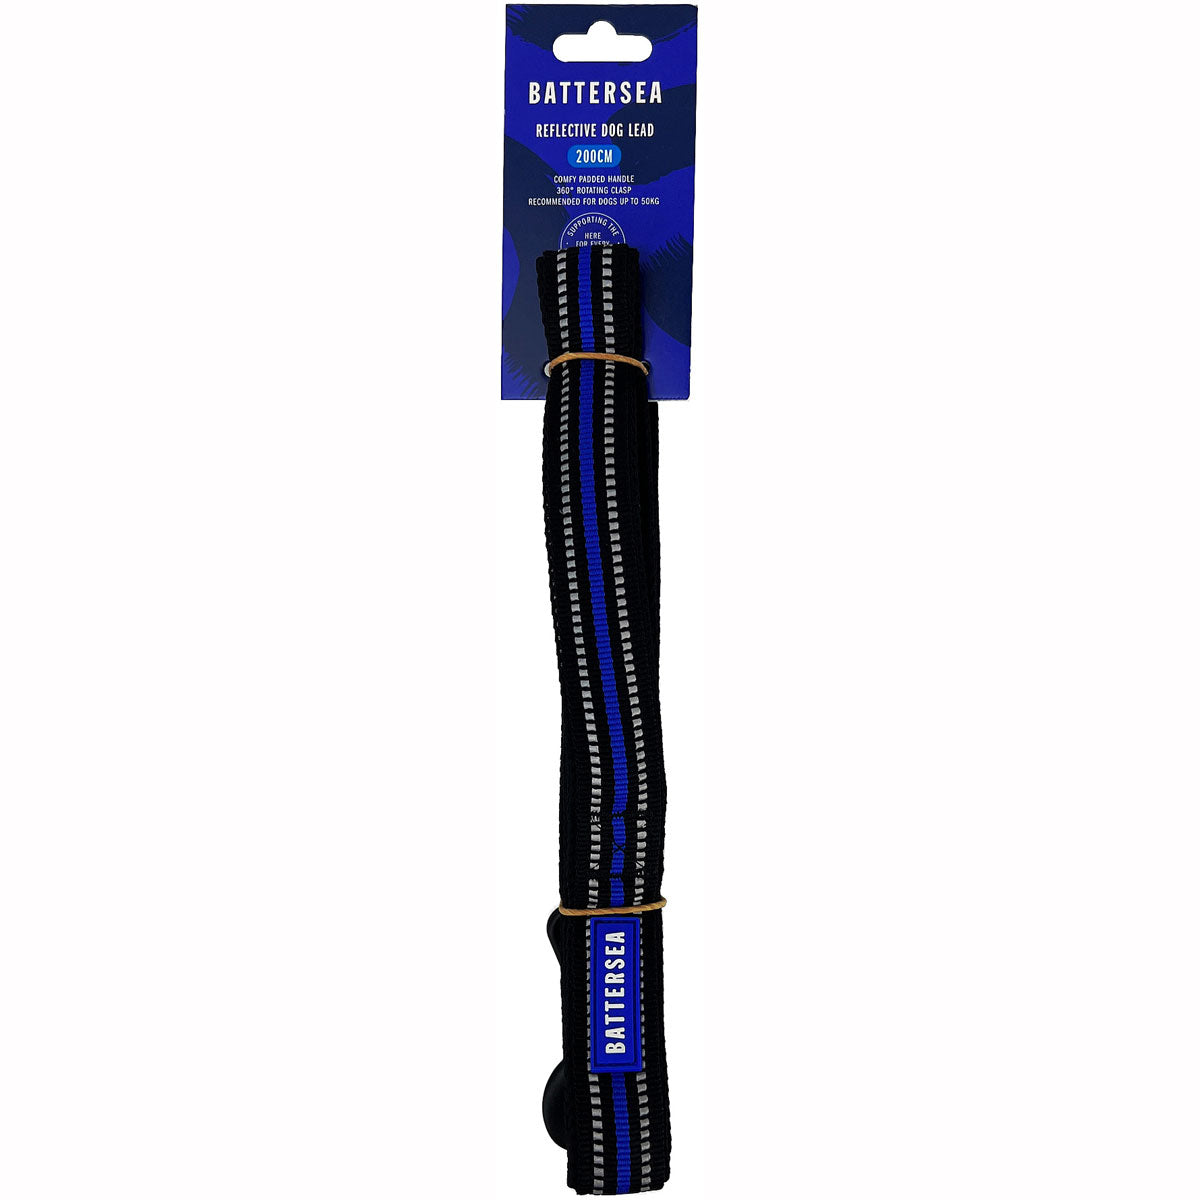 The 200cms Battersea Reflective Dog Lead: Make late-night walks with your pet a safe & enjoyable experience Blue